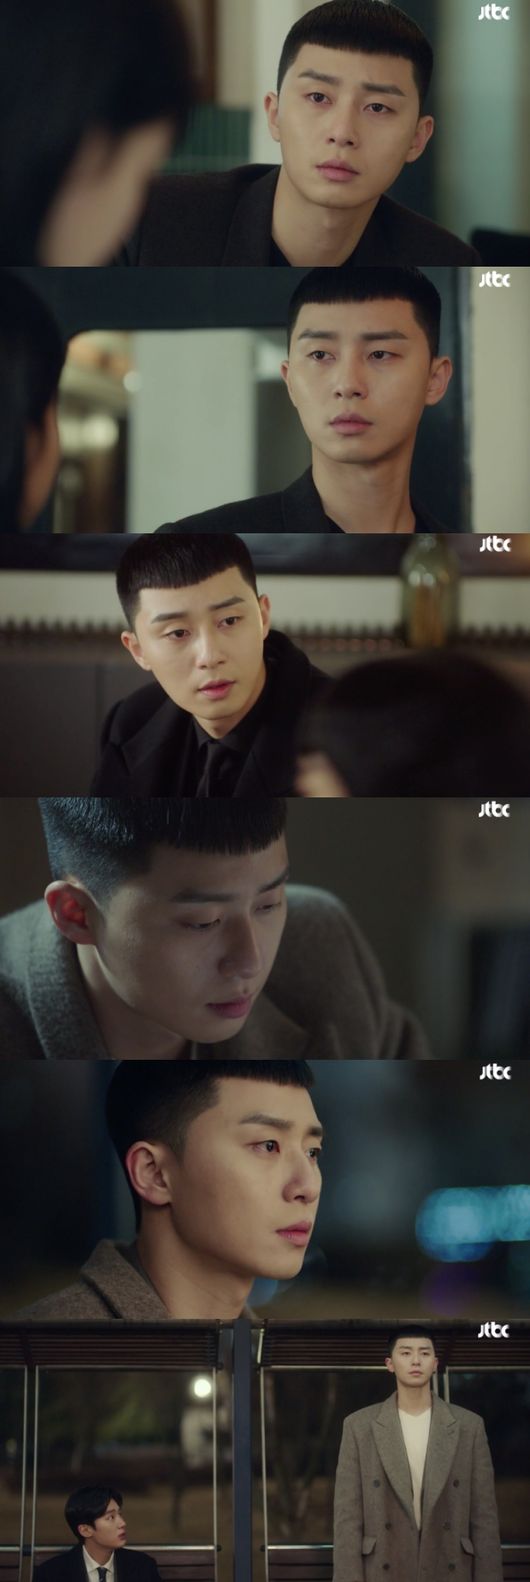 In JTBCs drama Itaewon Klath (playplayplay by Gwangjin, directed by Kim Sung-yoon Kang Min-gu), which aired on the 14th, Park Sae-ro-yi (Park Seo-joon) was shown running to the hospital to confess to Joe-yool Lee (Kim Da-mi).Jang Geun-soo (Kim Dong-hee), who has a crush on Seo-yool Lee, also revealed his Kokoro.Park Sae-ro-yi, who had been concerned about Joe-yool Lee since one day, had been trying to hide his interest in the staff, but it was Kokoro of a man directed at a beloved woman.The way he covered his coat with Joe-yool Lee, who was asleep at the company desk, was enough to impress.Park Sae-ro-yi told Joe-yool Lee, Do not do that to me, do not meet Ausua now, and someone does not work all night without dating.Do not do it now that you like me. But he began to show a gradually changed affection, saying, Why should I feel sorry for you? Why do you feel such a strange, strange feeling?Joe-yool Lee noticed such a Kokoro.When Joe-yool Lee, who had fallen overworked, focused on his work, he worried that he was a little rest, if you move now, youre fired.Choi Seung-kwon (Ryu Kyung-soo) and Ma Hyun-yi (Lee Joo-young) asked him to watch Joe-yol Lee.Joe-yool Lee said, My favorite Kokoro told me to cut off the reason for dismissal.I can express my affection to the representative because I am a good worker and a necessary person, so I have to be a necessary person who has to be around no matter what I say.Park Sae-ro-yi, who learned the real inside of Seo-yool Lee, once again felt a fond feeling.In the end, I had to turn around without presenting the necklace that Seo-yool Lee wanted to have.He felt the feeling of you all over when he saw the traces left by Seo-yool Lee, and Seo-yool Lee is a woman who can live a life.A girl you like, Kokoro, youll have to fold. Its betrayal, its trash. But Im trying. I like Seo-yool Lee.I wont say Im sorry, he told Jang.Park Seo-joon expresses the true Kokoro of a man who wants to protect his dreams and the spirit of youth for dreams.His performance made the Park Sae-ro-yi character even more brilliant.The reason why I cheered for the dream and love of Park Sae-ro-yi, the Park Seo-joon ticket, is not to explain.For viewers who have been frustrated in absurd and clever reality, Itaewon Clath is a sweet fantasy.Itaewon Klath captures broadcast screen